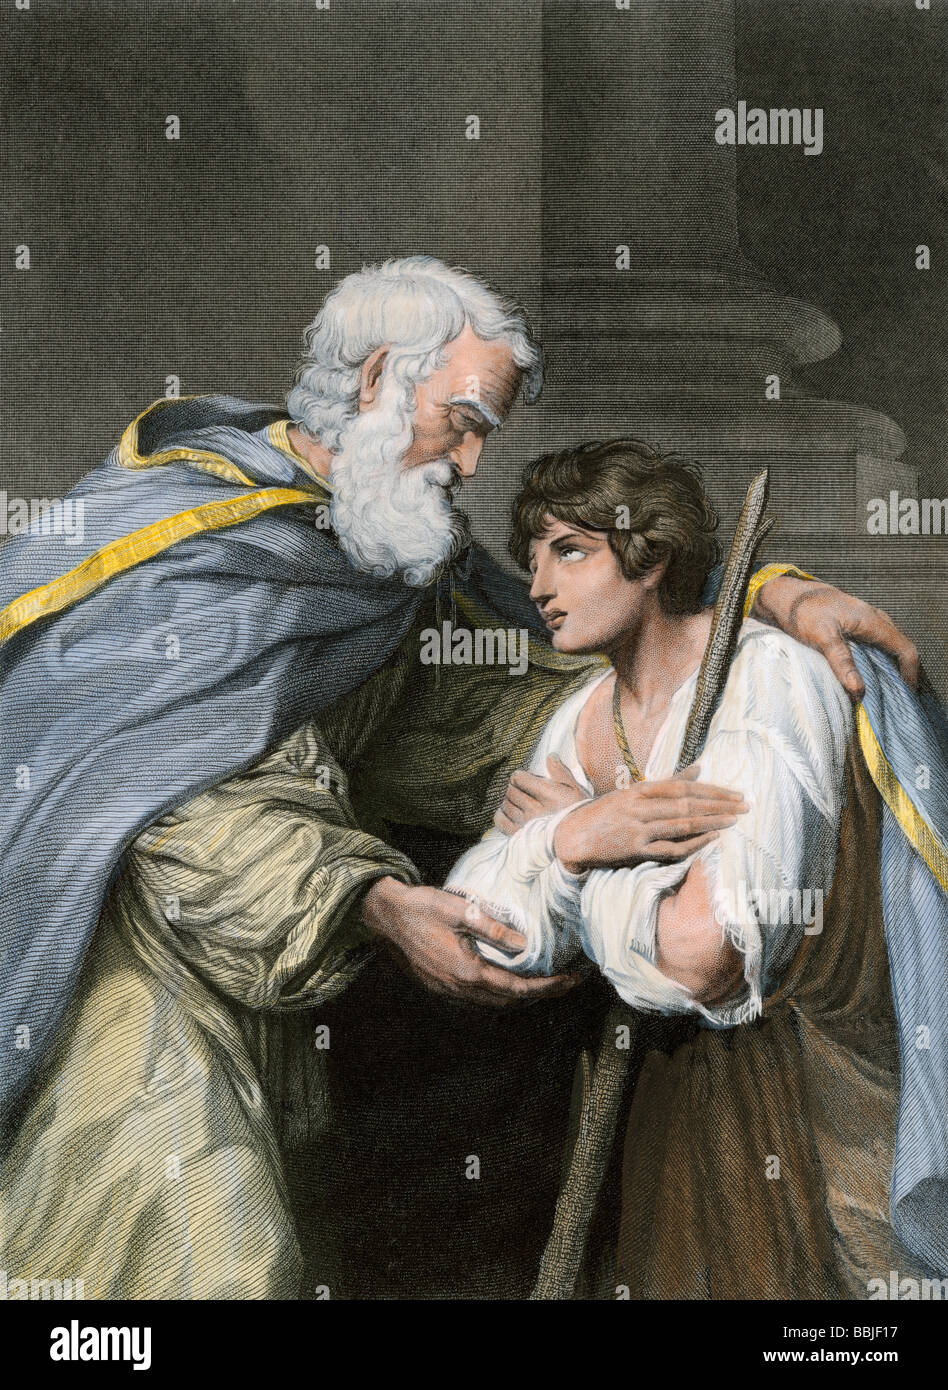 Prodigal son returns home and asks his father's forgiveness, a parable in the biblical Book of Luke. Hand-colored engraving Stock Photo